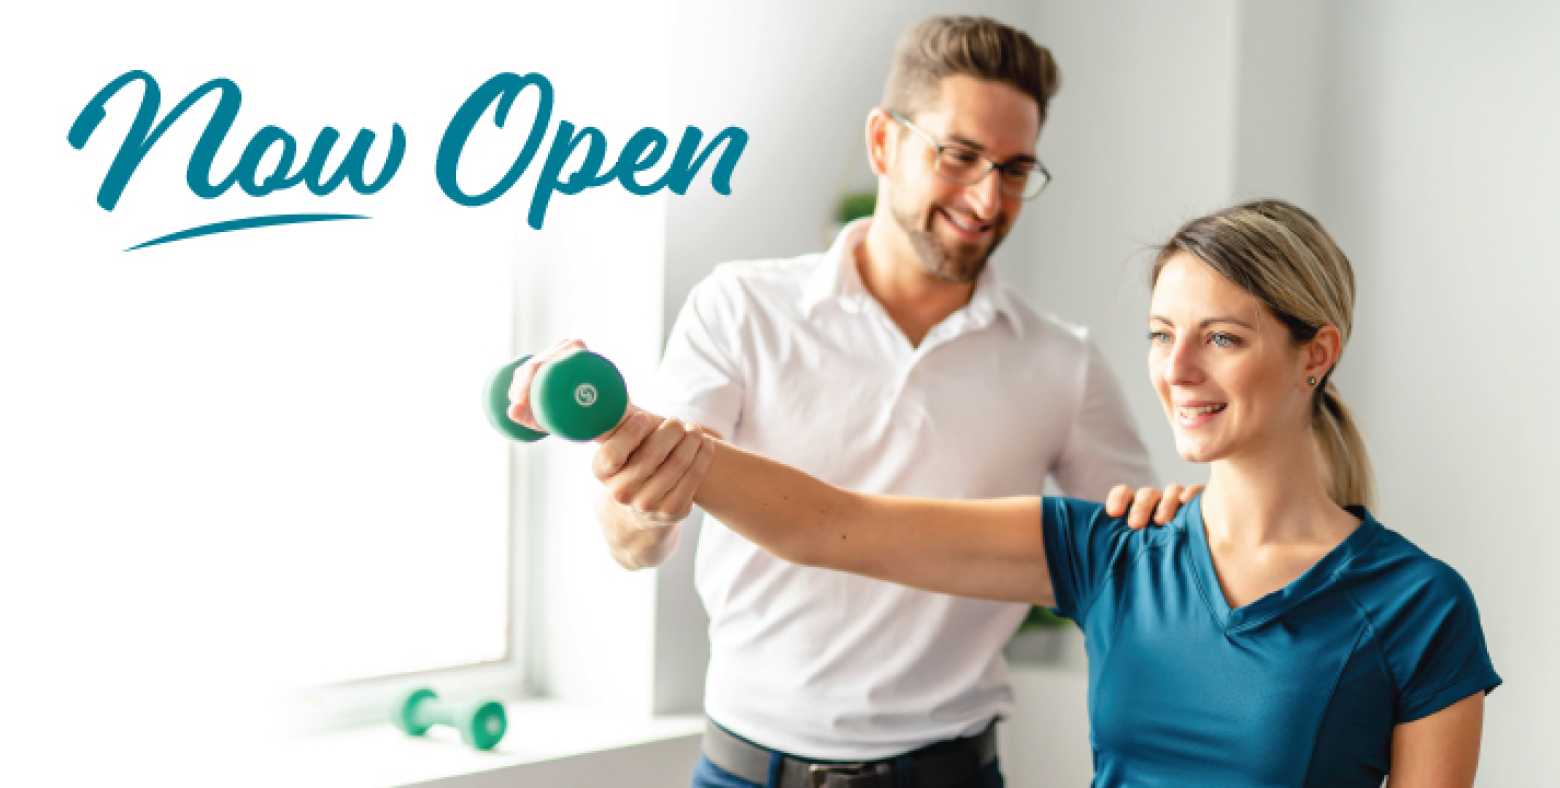 "Now Open" text and physical therapist helping patient do exercise with dumbbell 